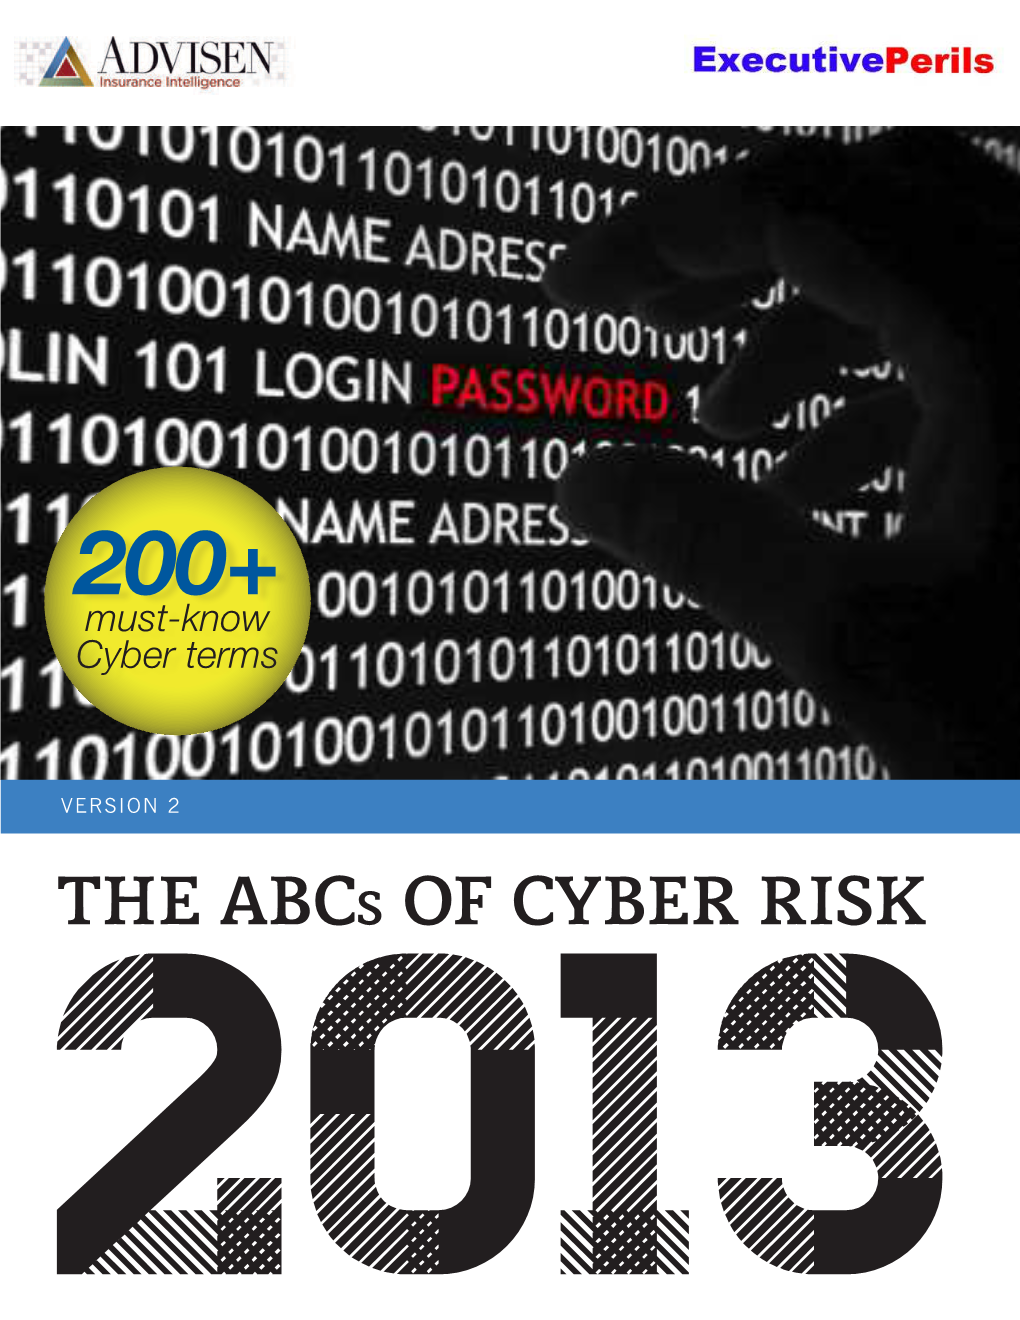 The Abcs of Cyber Risk 2013